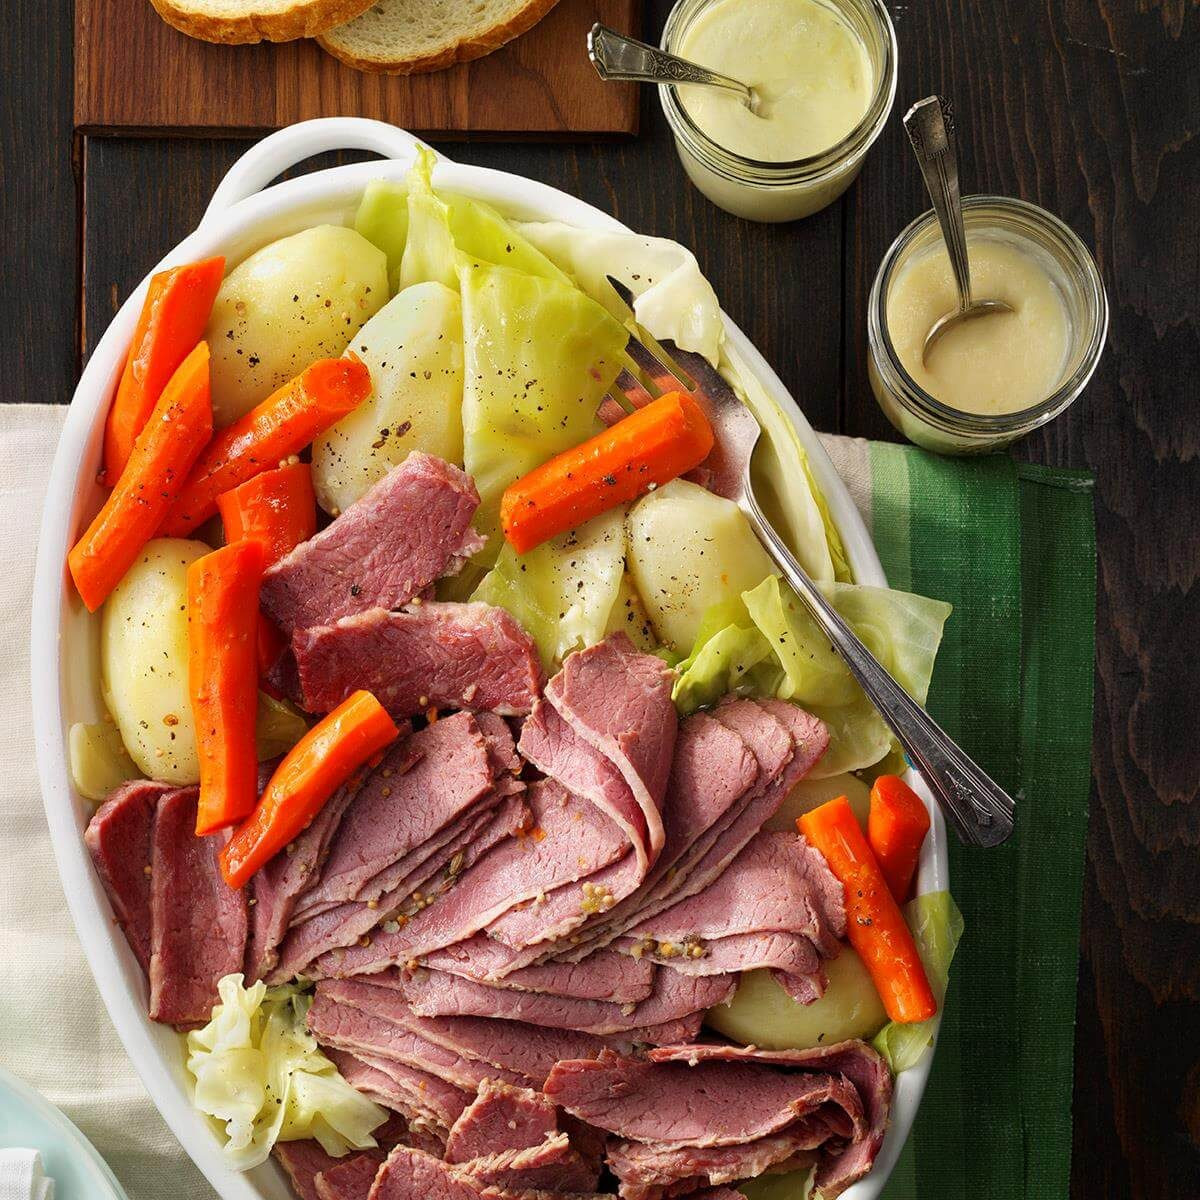 Recipe for Corned Beef and Cabbage Elegant 22 Corned Beef and Cabbage Recipes to Make All Year